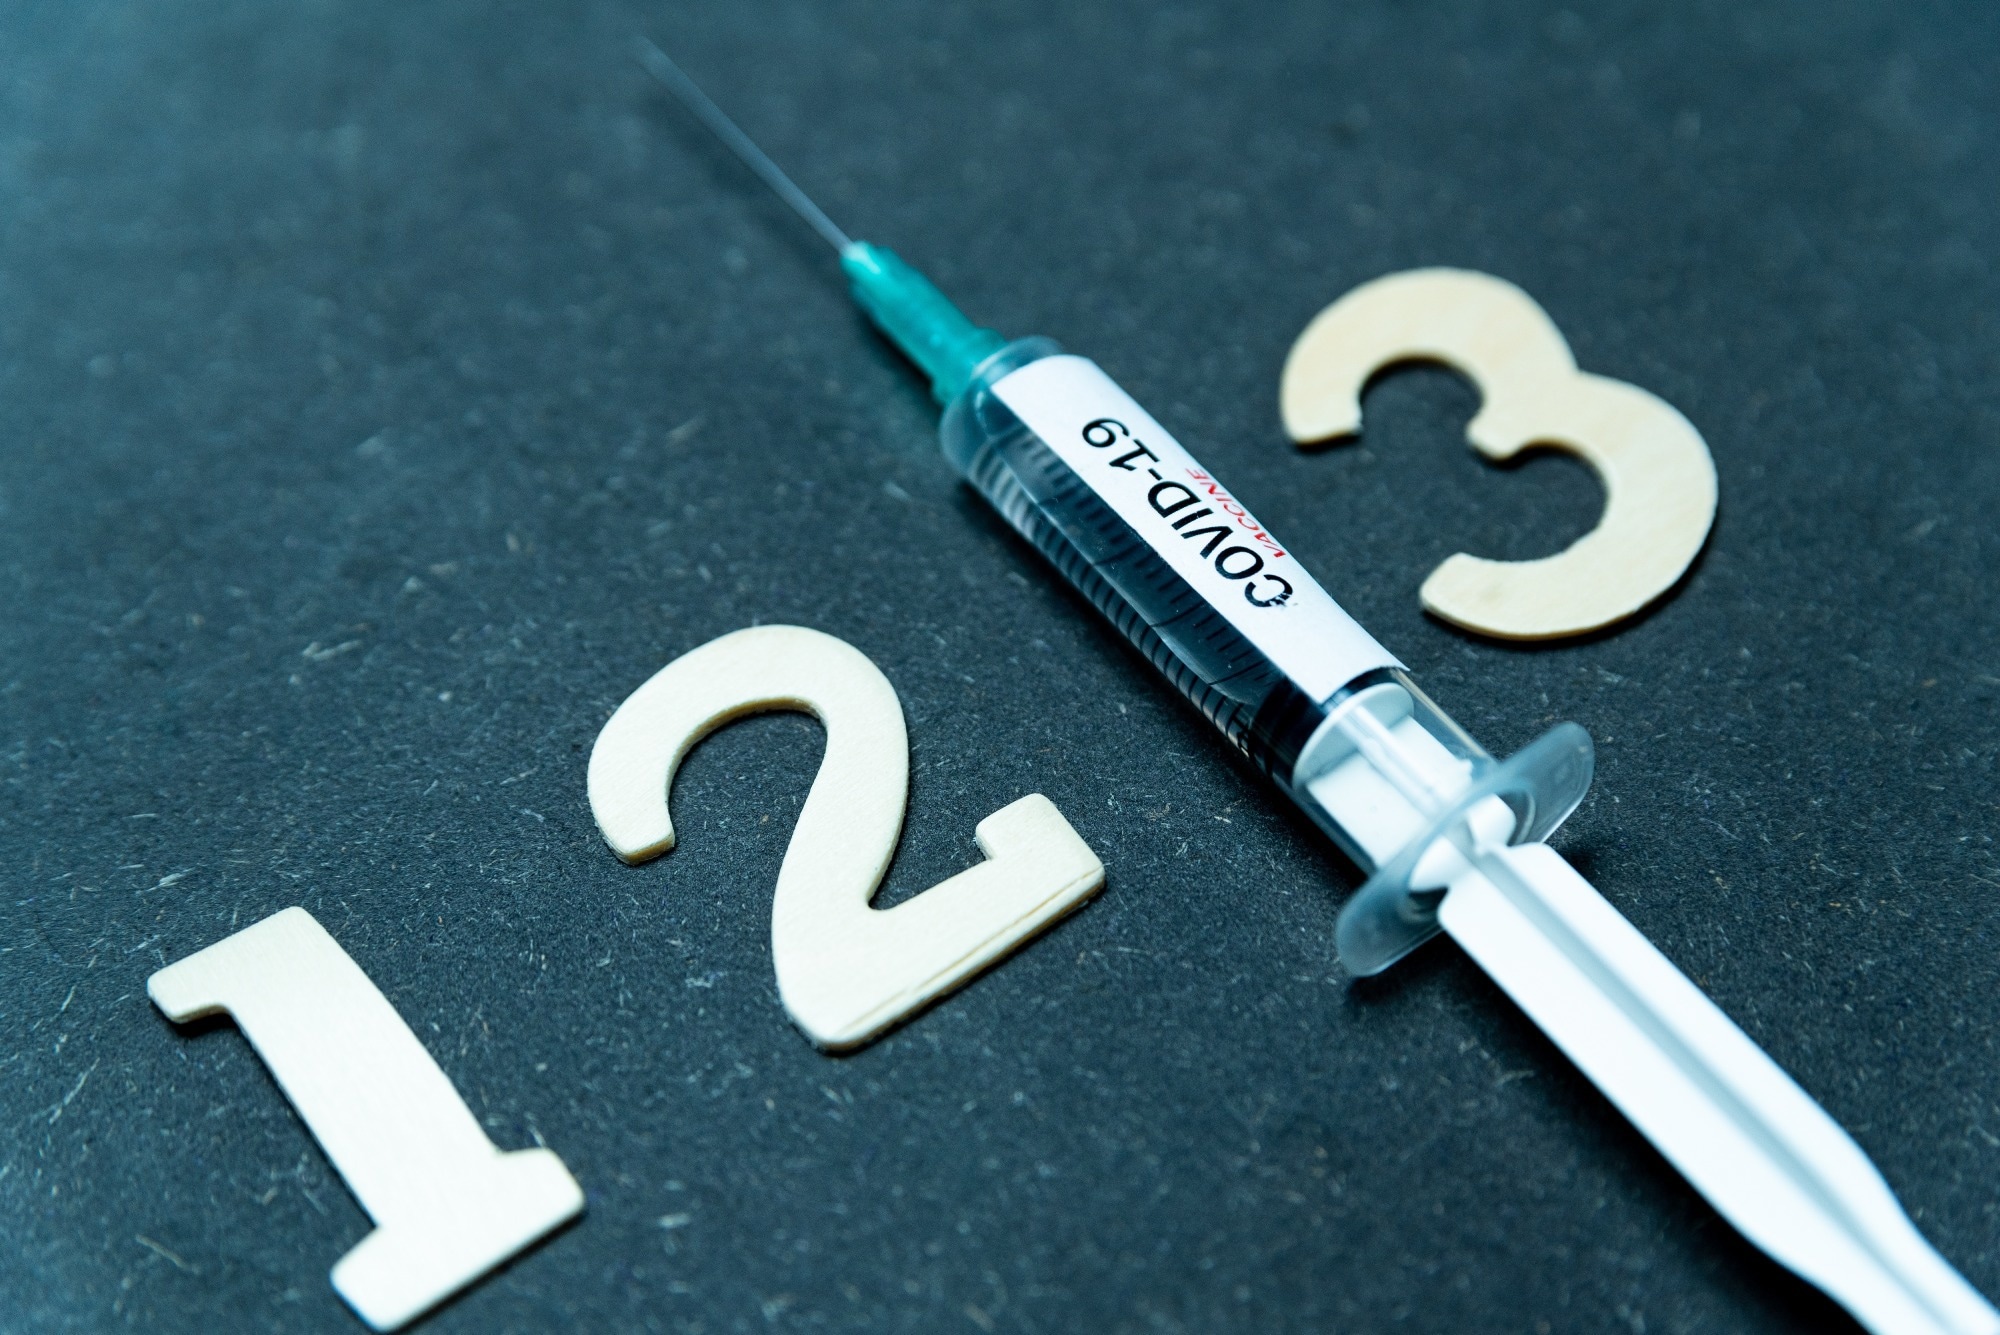 Study: Effectiveness of mRNA COVID-19 vaccine boosters against infection, hospitalization and death: a target trial emulation in the omicron (B.1.1.529) variant era. Image Credit: Davide Bonaldo / Shutterstock